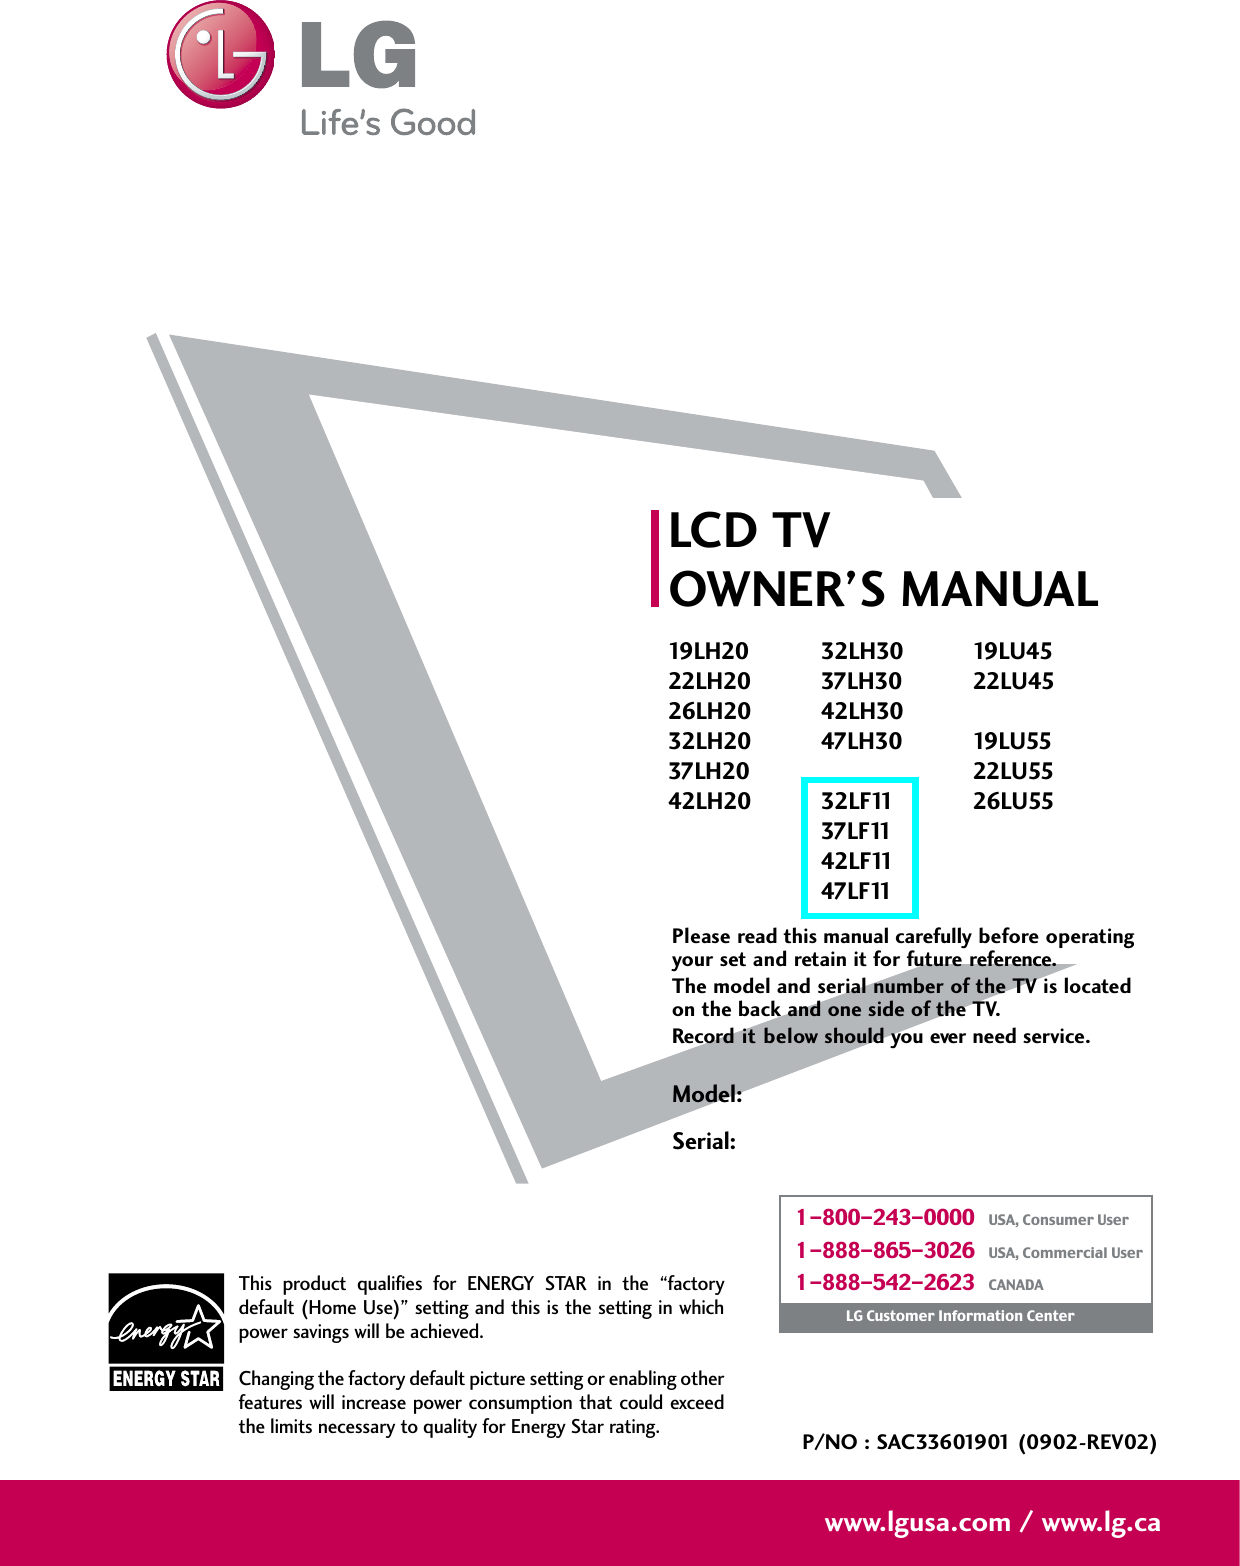 Please read this manual carefully before operatingyour set and retain it for future reference.The model and serial number of the TV is locatedon the back and one side of the TV. Record it below should you ever need service.Model:Serial:LCD TVOWNER’S MANUAL19LH2022LH2026LH2032LH2037LH2042LH2032LH3037LH3042LH3047LH3032LF1137LF1142LF1147LF1119LU4522LU4519LU5522LU5526LU55P/NO : SAC33601901 (0902-REV02)www.lgusa.com / www.lg.caThis  product  qualifies  for  ENERGY  STAR  in  the  “factorydefault (Home Use)” setting and this is the setting in whichpower savings will be achieved.Changing the factory default picture setting or enabling otherfeatures will increase power  consumption that could exceedthe limits necessary to quality for Energy Star rating.1-800-243-0000   USA, Consumer User1-888-865-3026   USA, Commercial User1-888-542-2623   CANADALG Customer Information Center